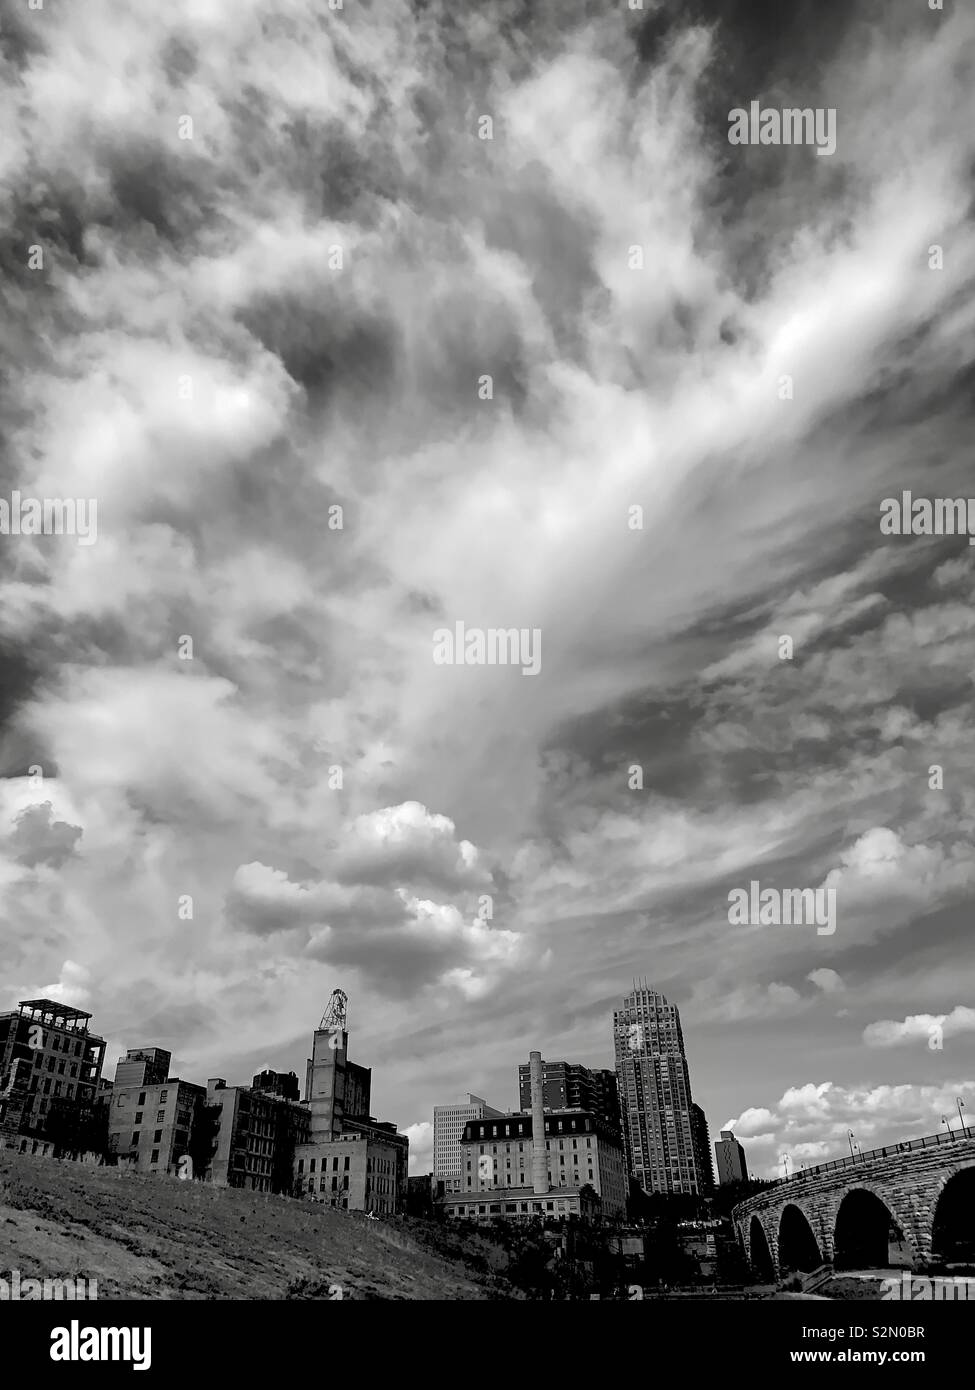 Cloudy spring afternoon with a city in the foreground. Stock Photo